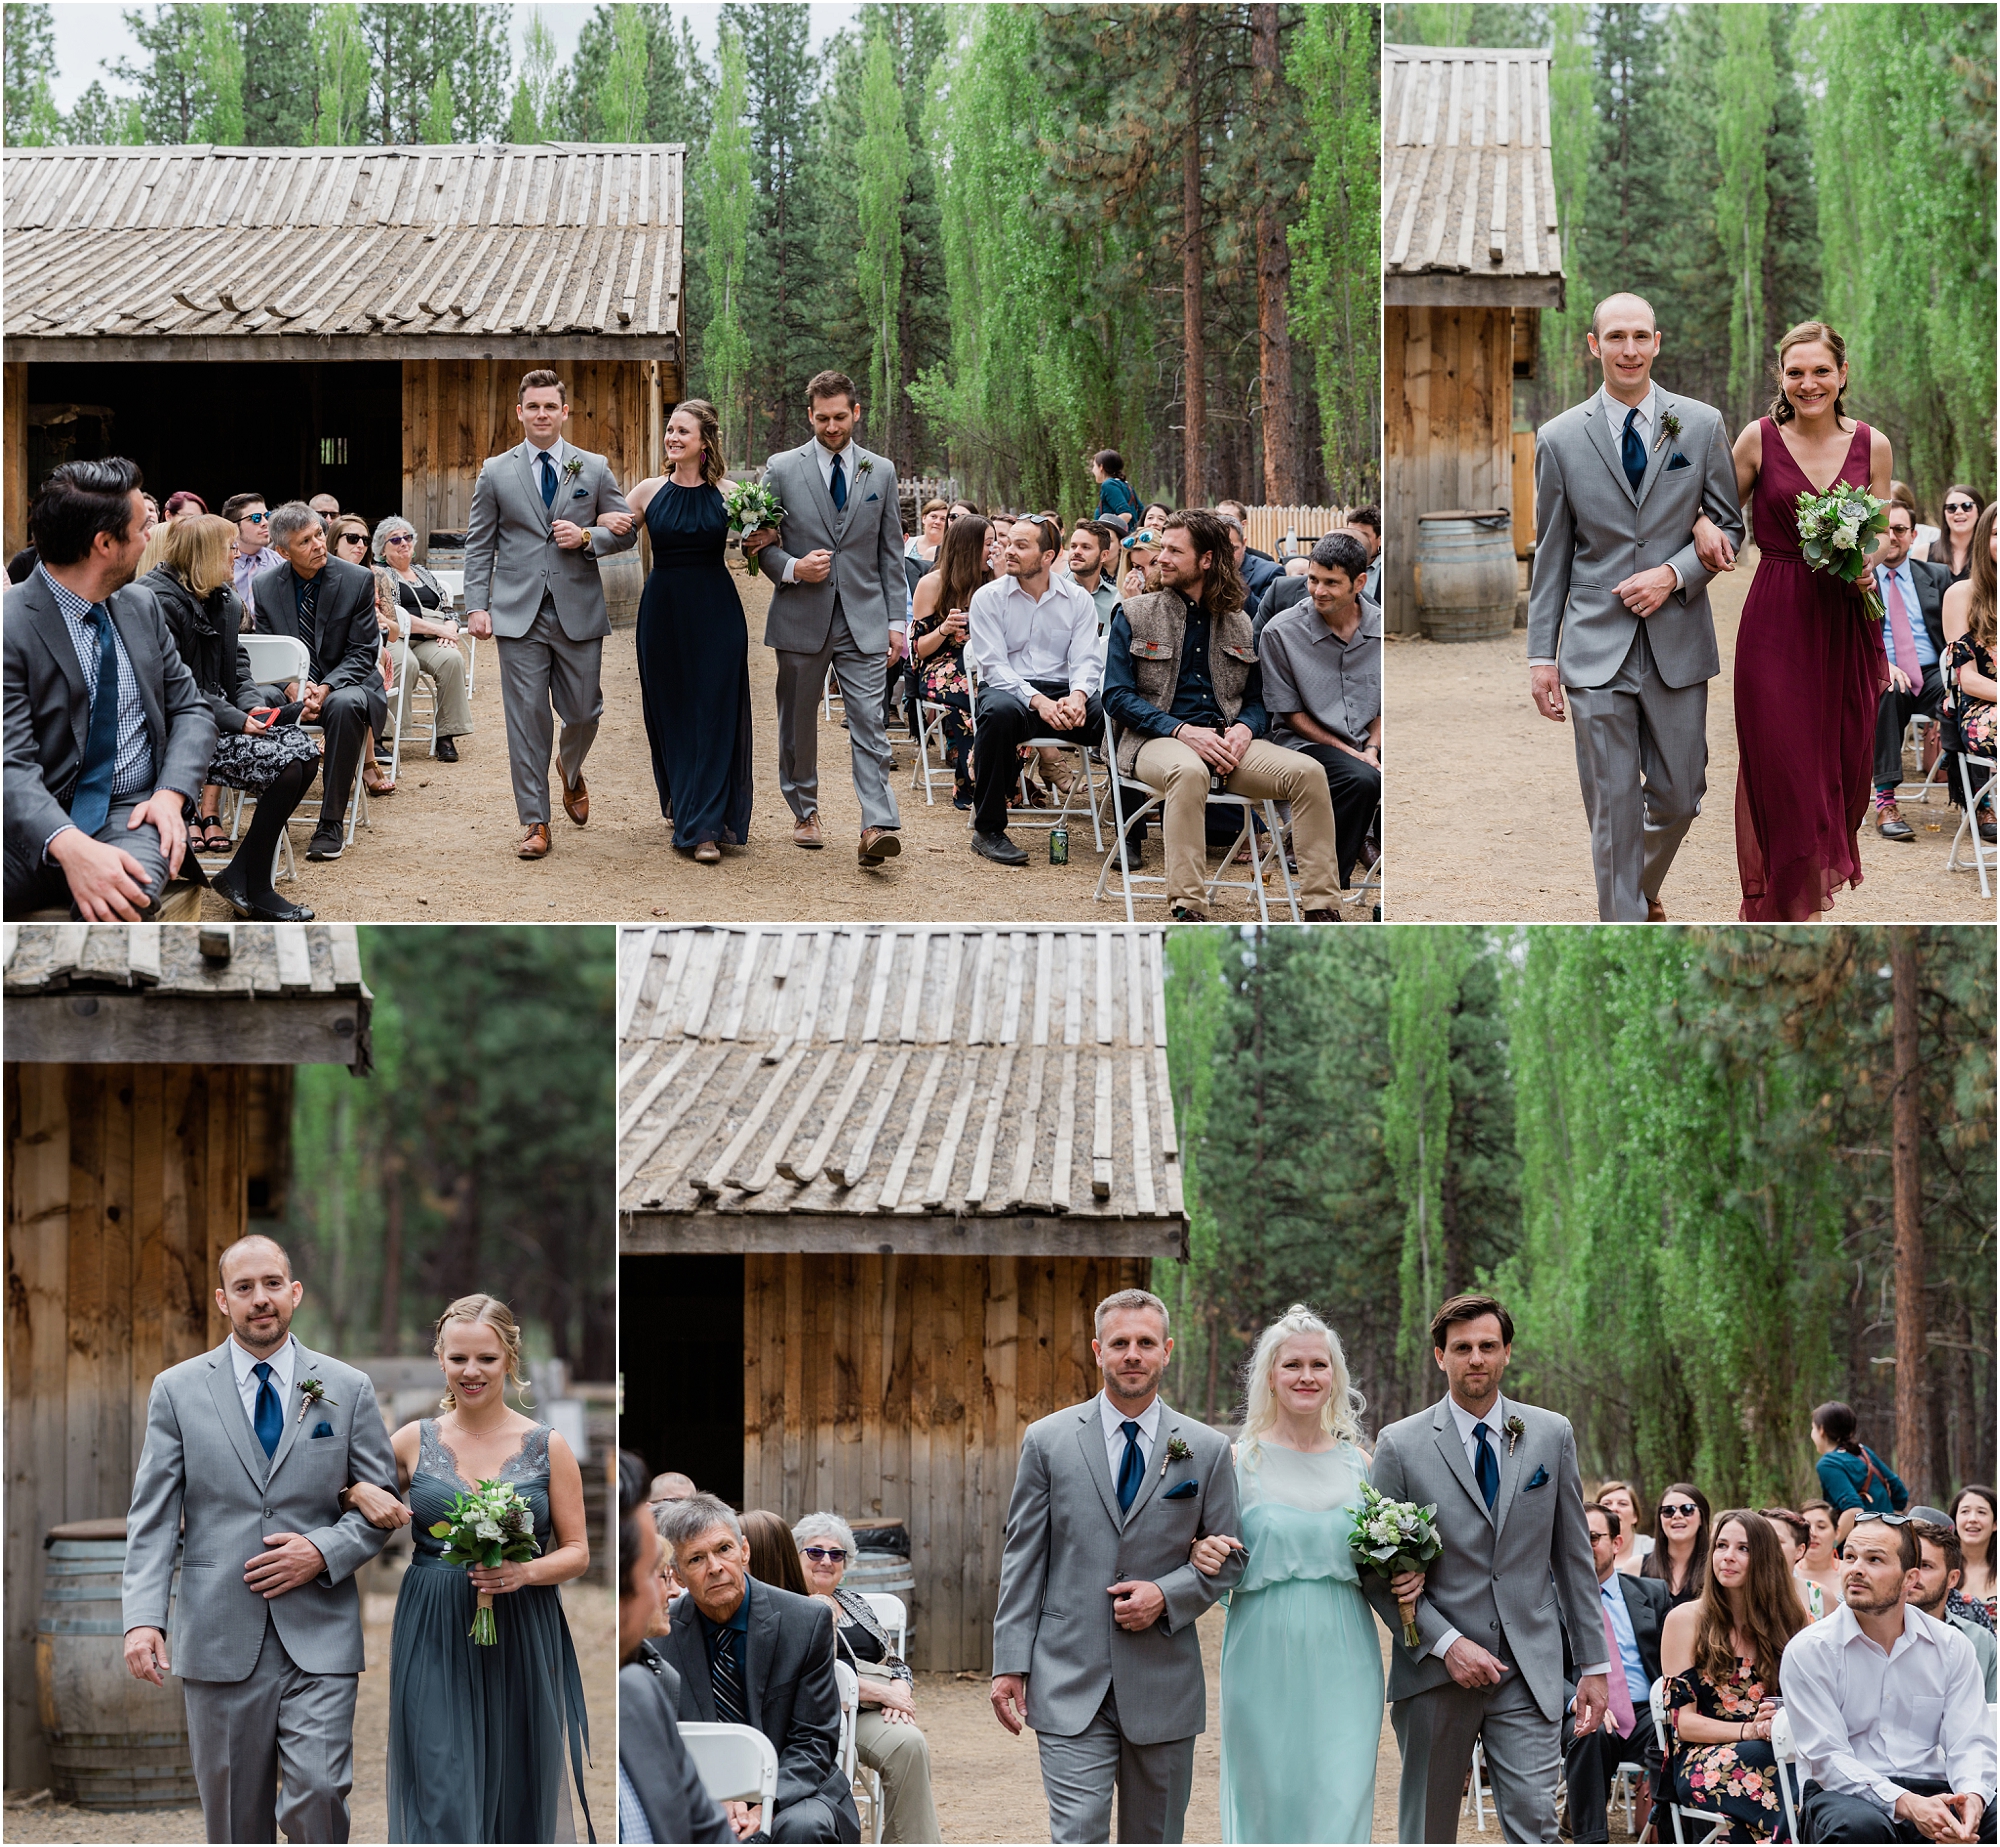 The wedding party, with the groomsmen wearing grey suits with cobalt blue ties, and the bridesmaids in navy, mint, cranberry and dusty blue, walk down the rustic dirt aisle towards the cabin serving as an alter at this outdoor wedding venue in Bend, OR. | Erica Swantek Photography